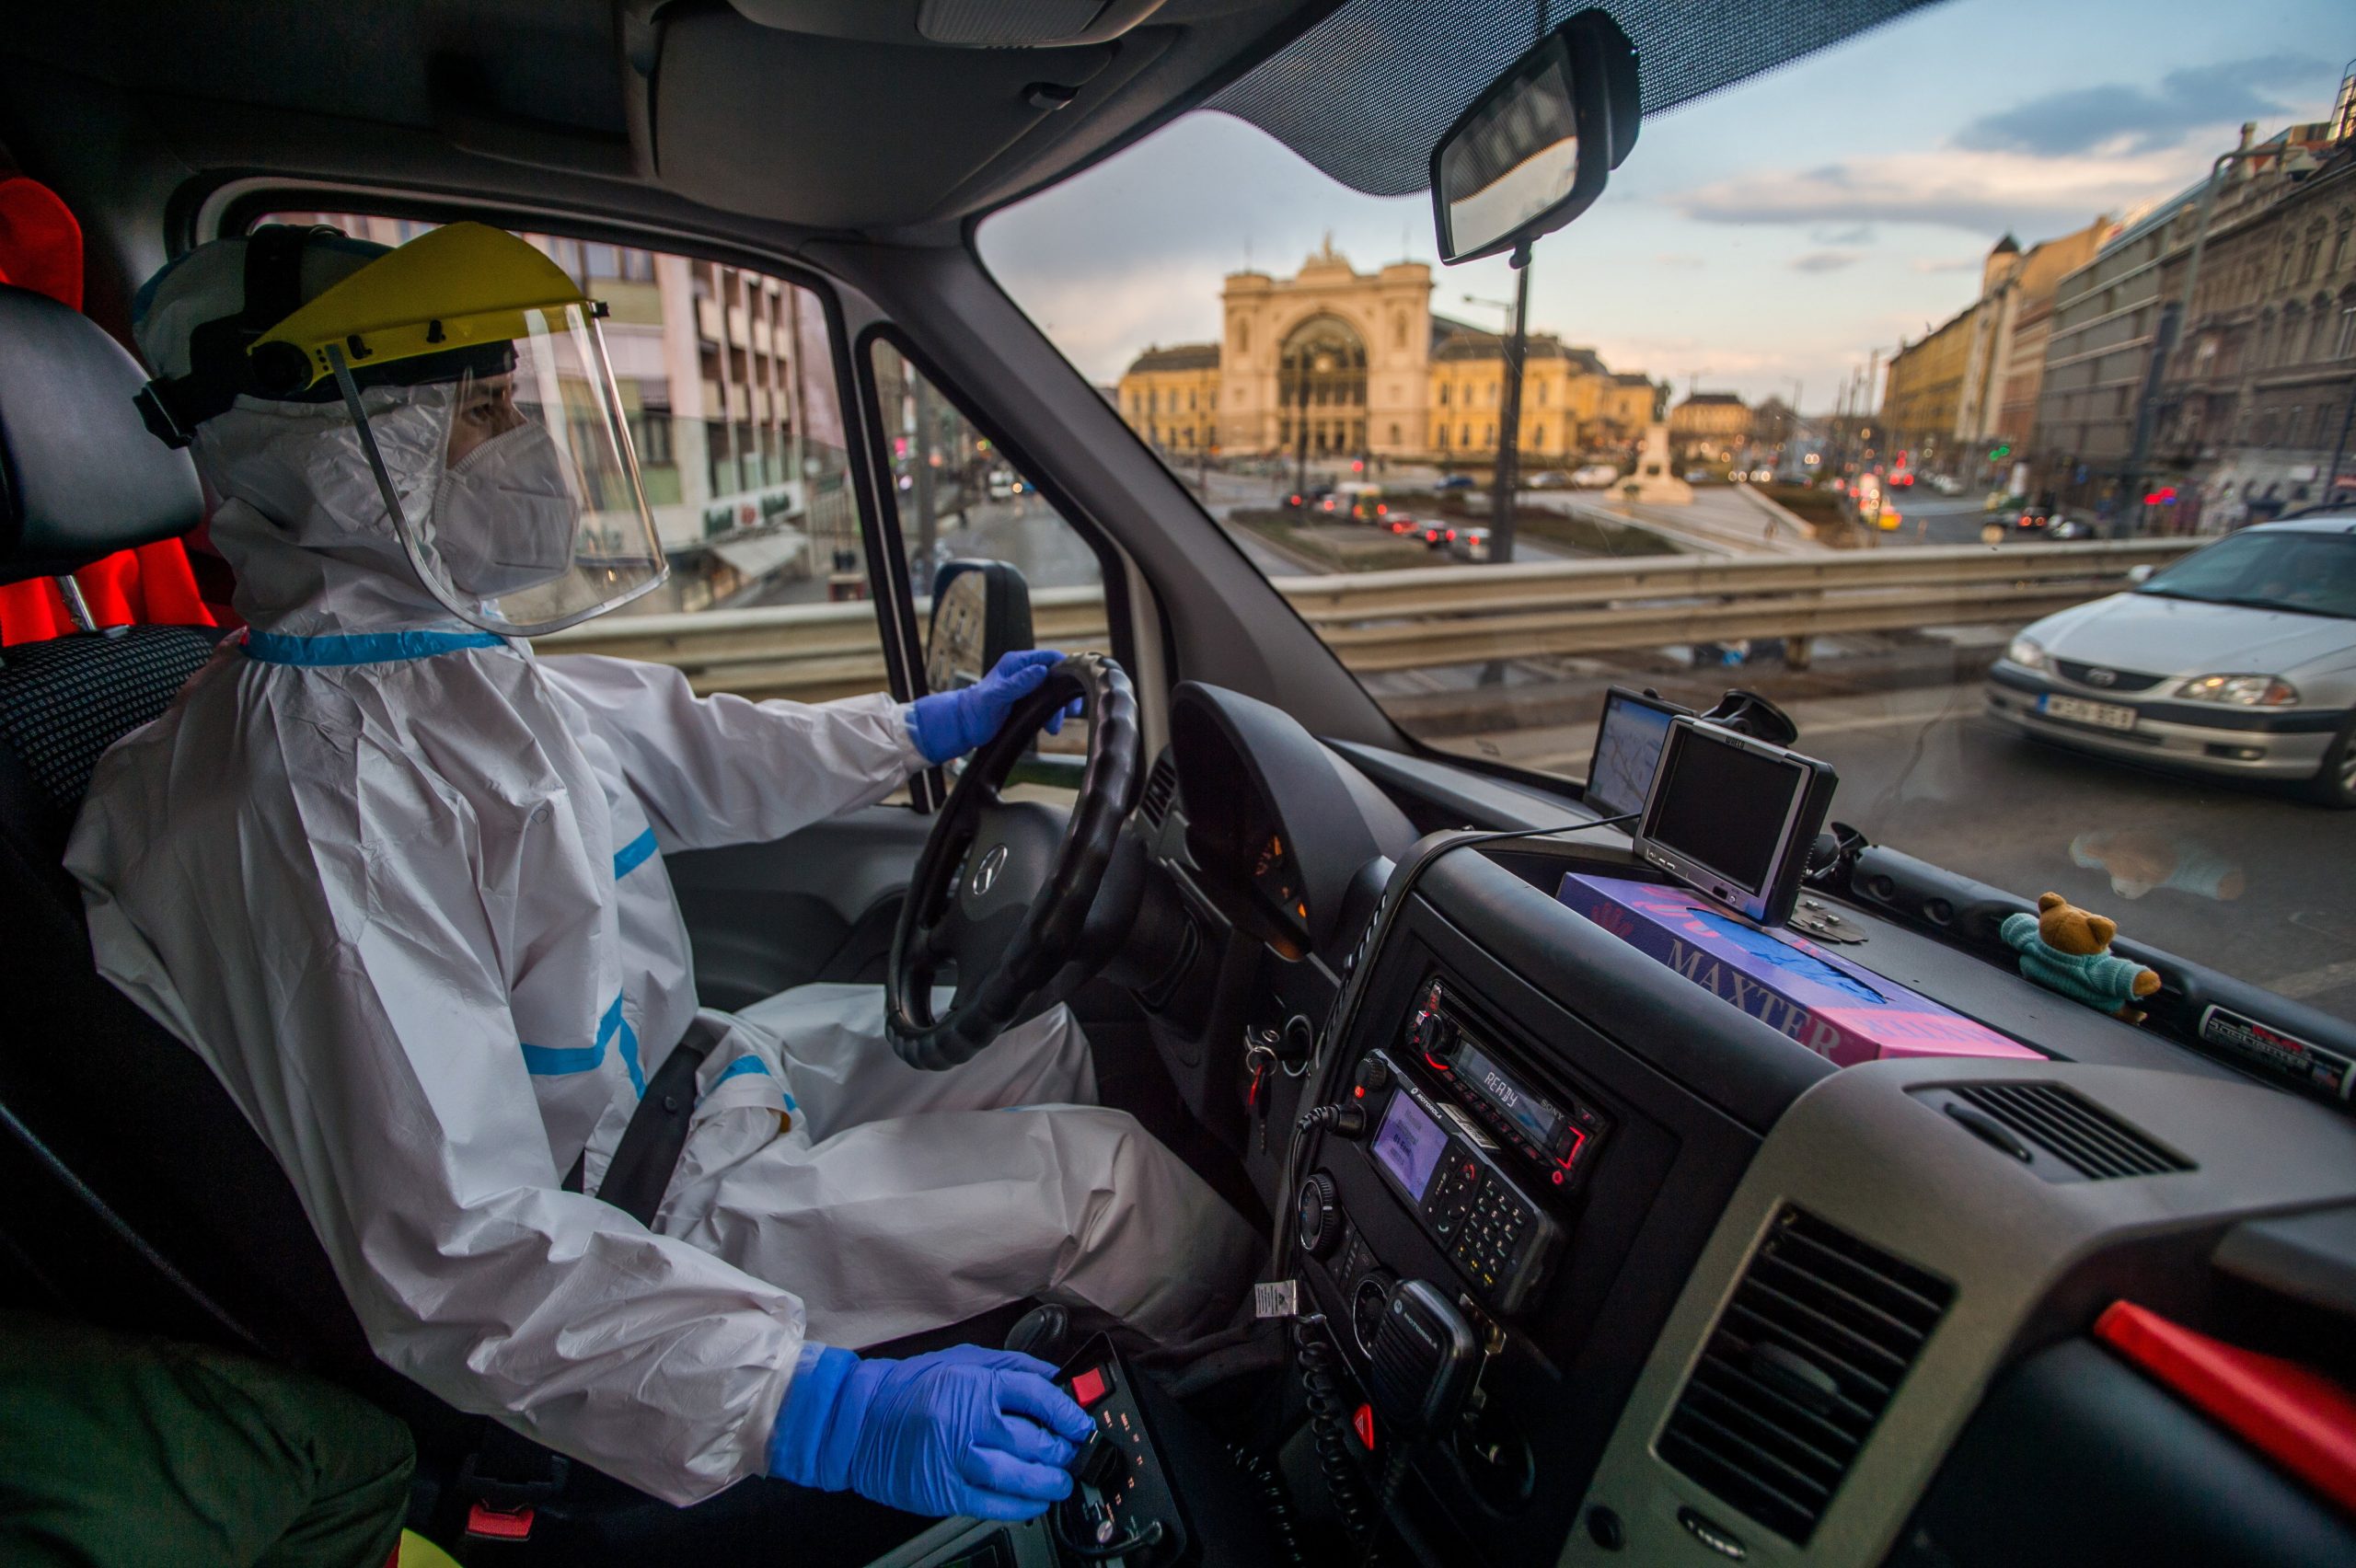 Hungary's 'State of Pandemic Preparedness' Extended to December